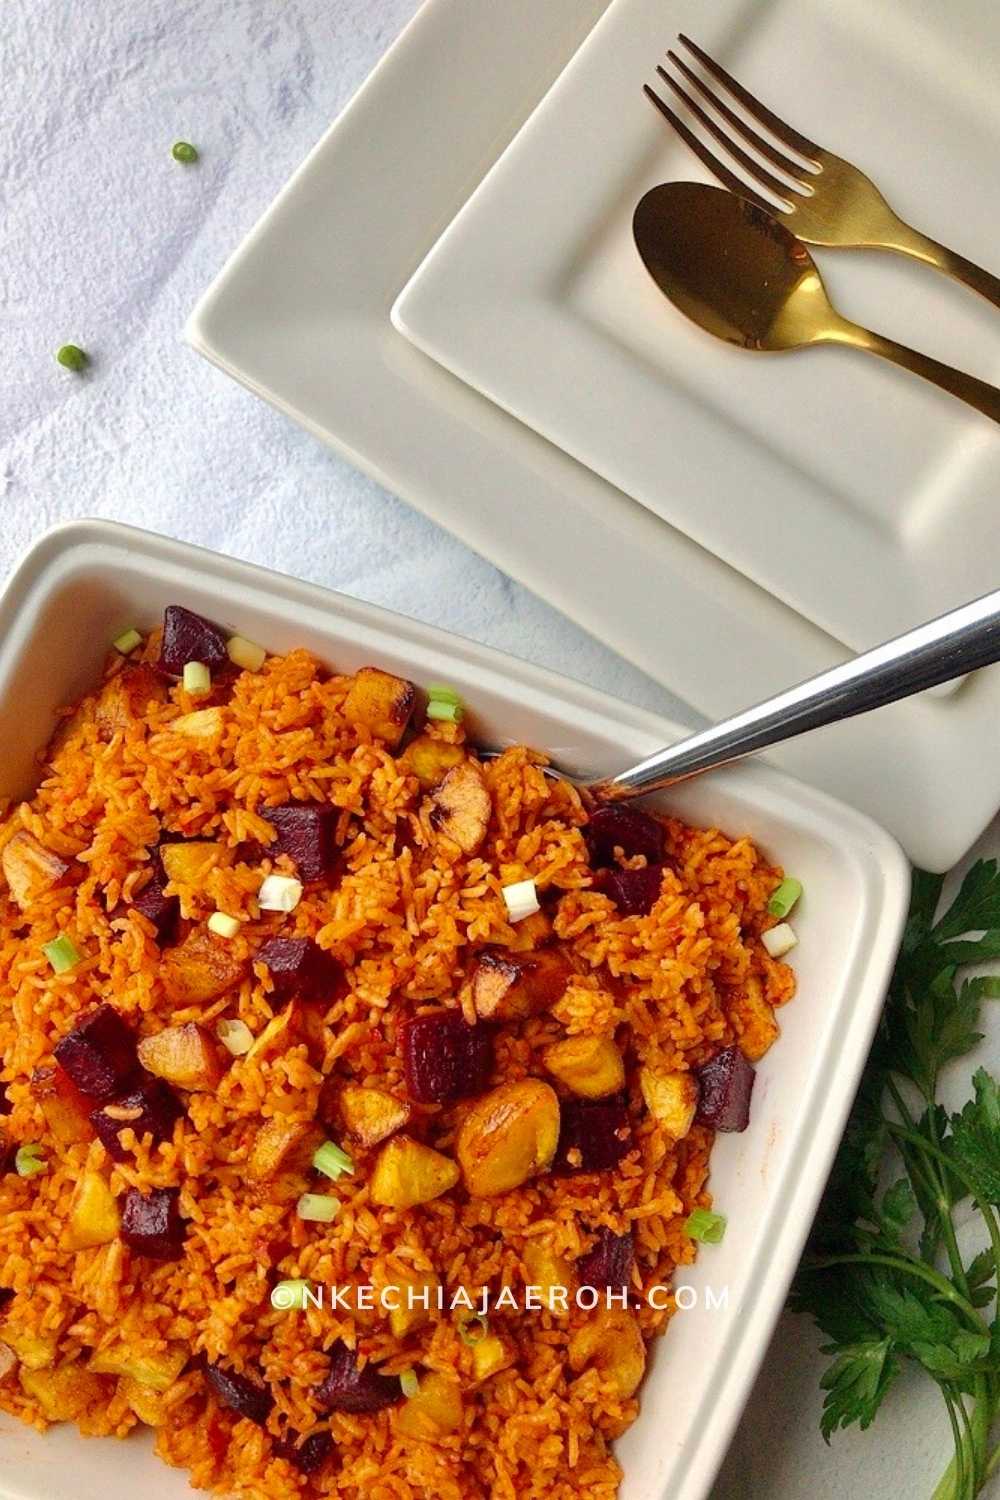 This healthy and insanely delicious brown rice jollof recipe is vegan, gluten-free, dairy-free, kosher, and the perfect side dish for every occasion. This brown rice recipe cooks very quick, and has a yummy nutty flavor. This dish is a winner, a crowd-pleaser, and hands down the best brown rice recipe! Whether you are looking for Thanksgiving side dish or Christmas side dish, this recipe is just right and perfect!